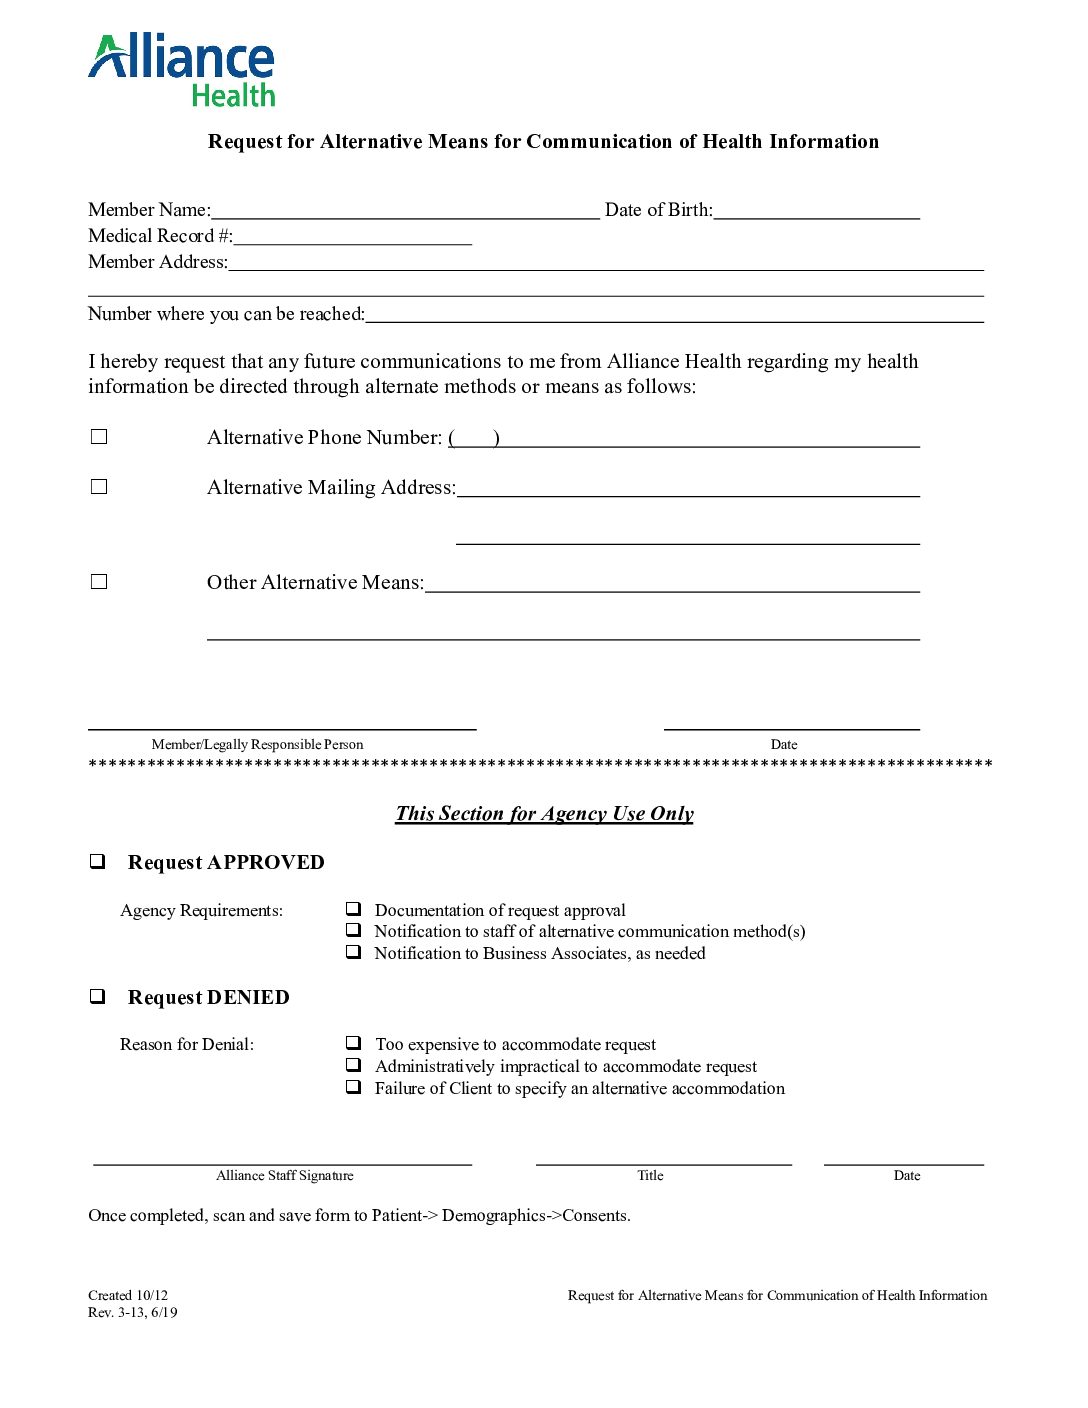 HIPAA Request for Alternative Means of Communication